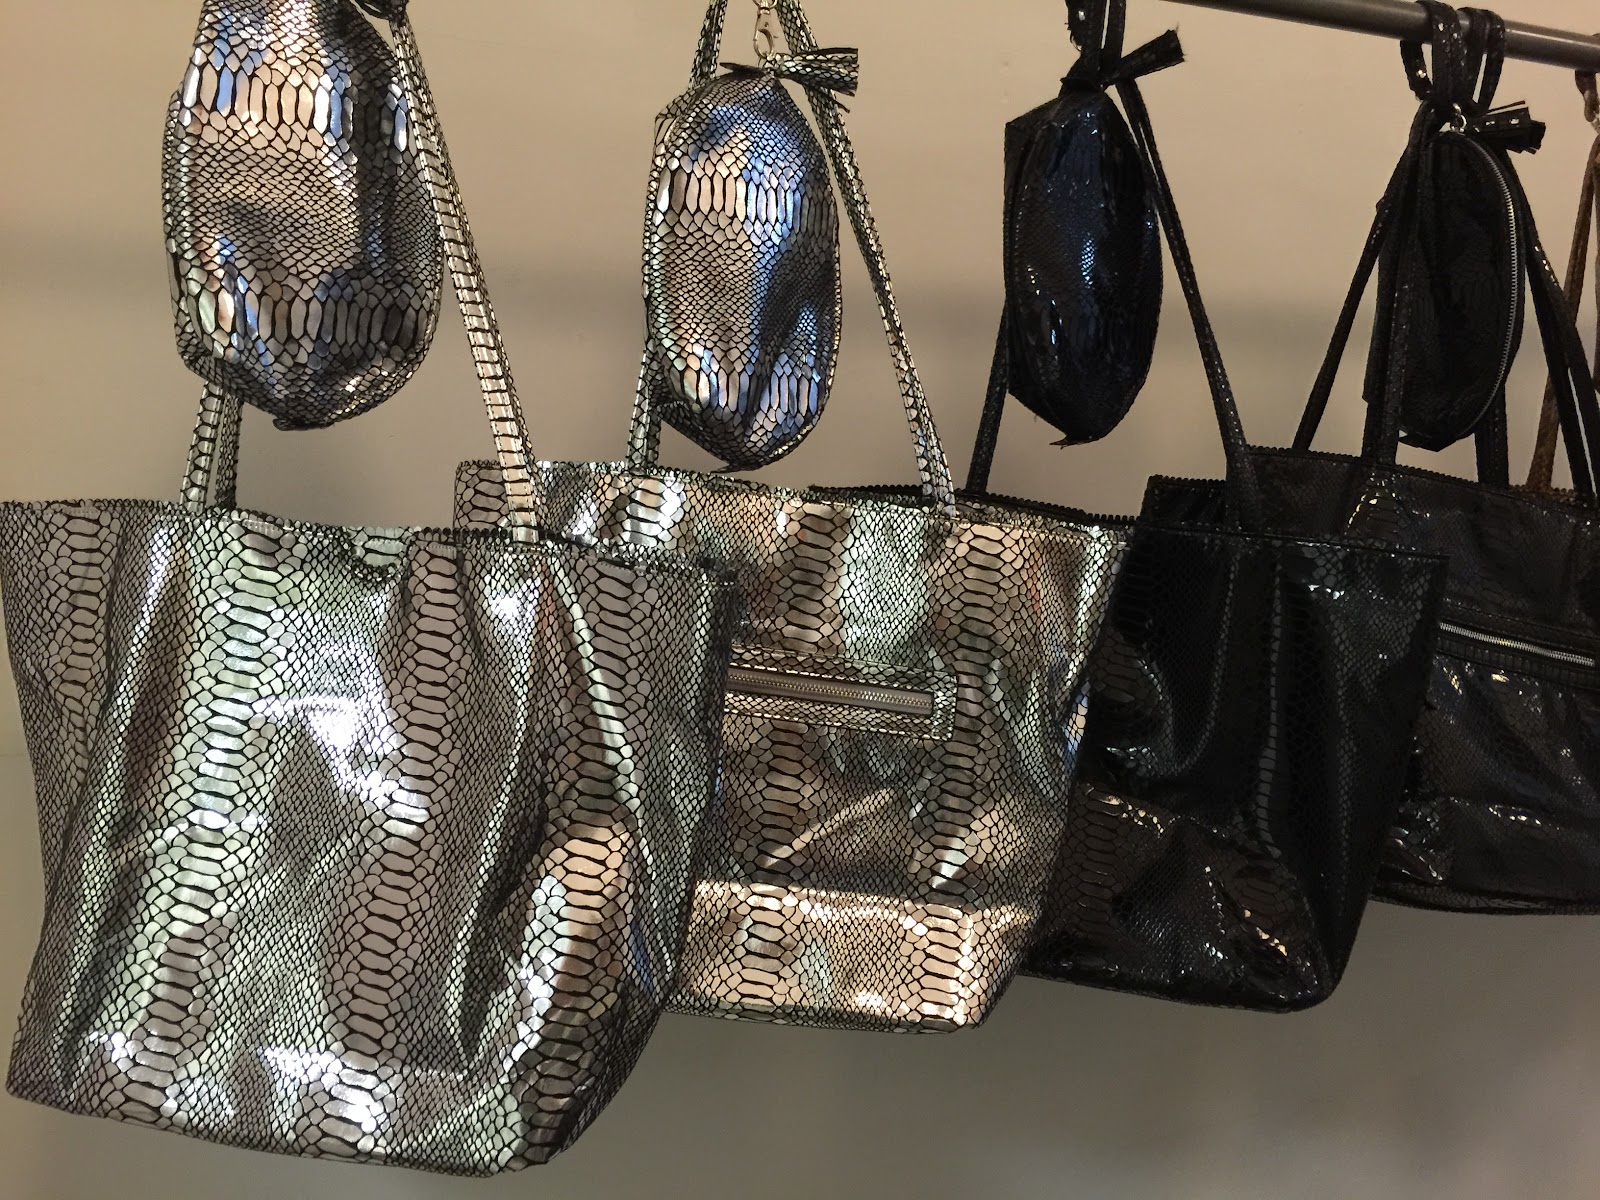 Rebecca Minkoff's Sample Sale Still Stocked with Mini Bags, Totes - Racked  NY